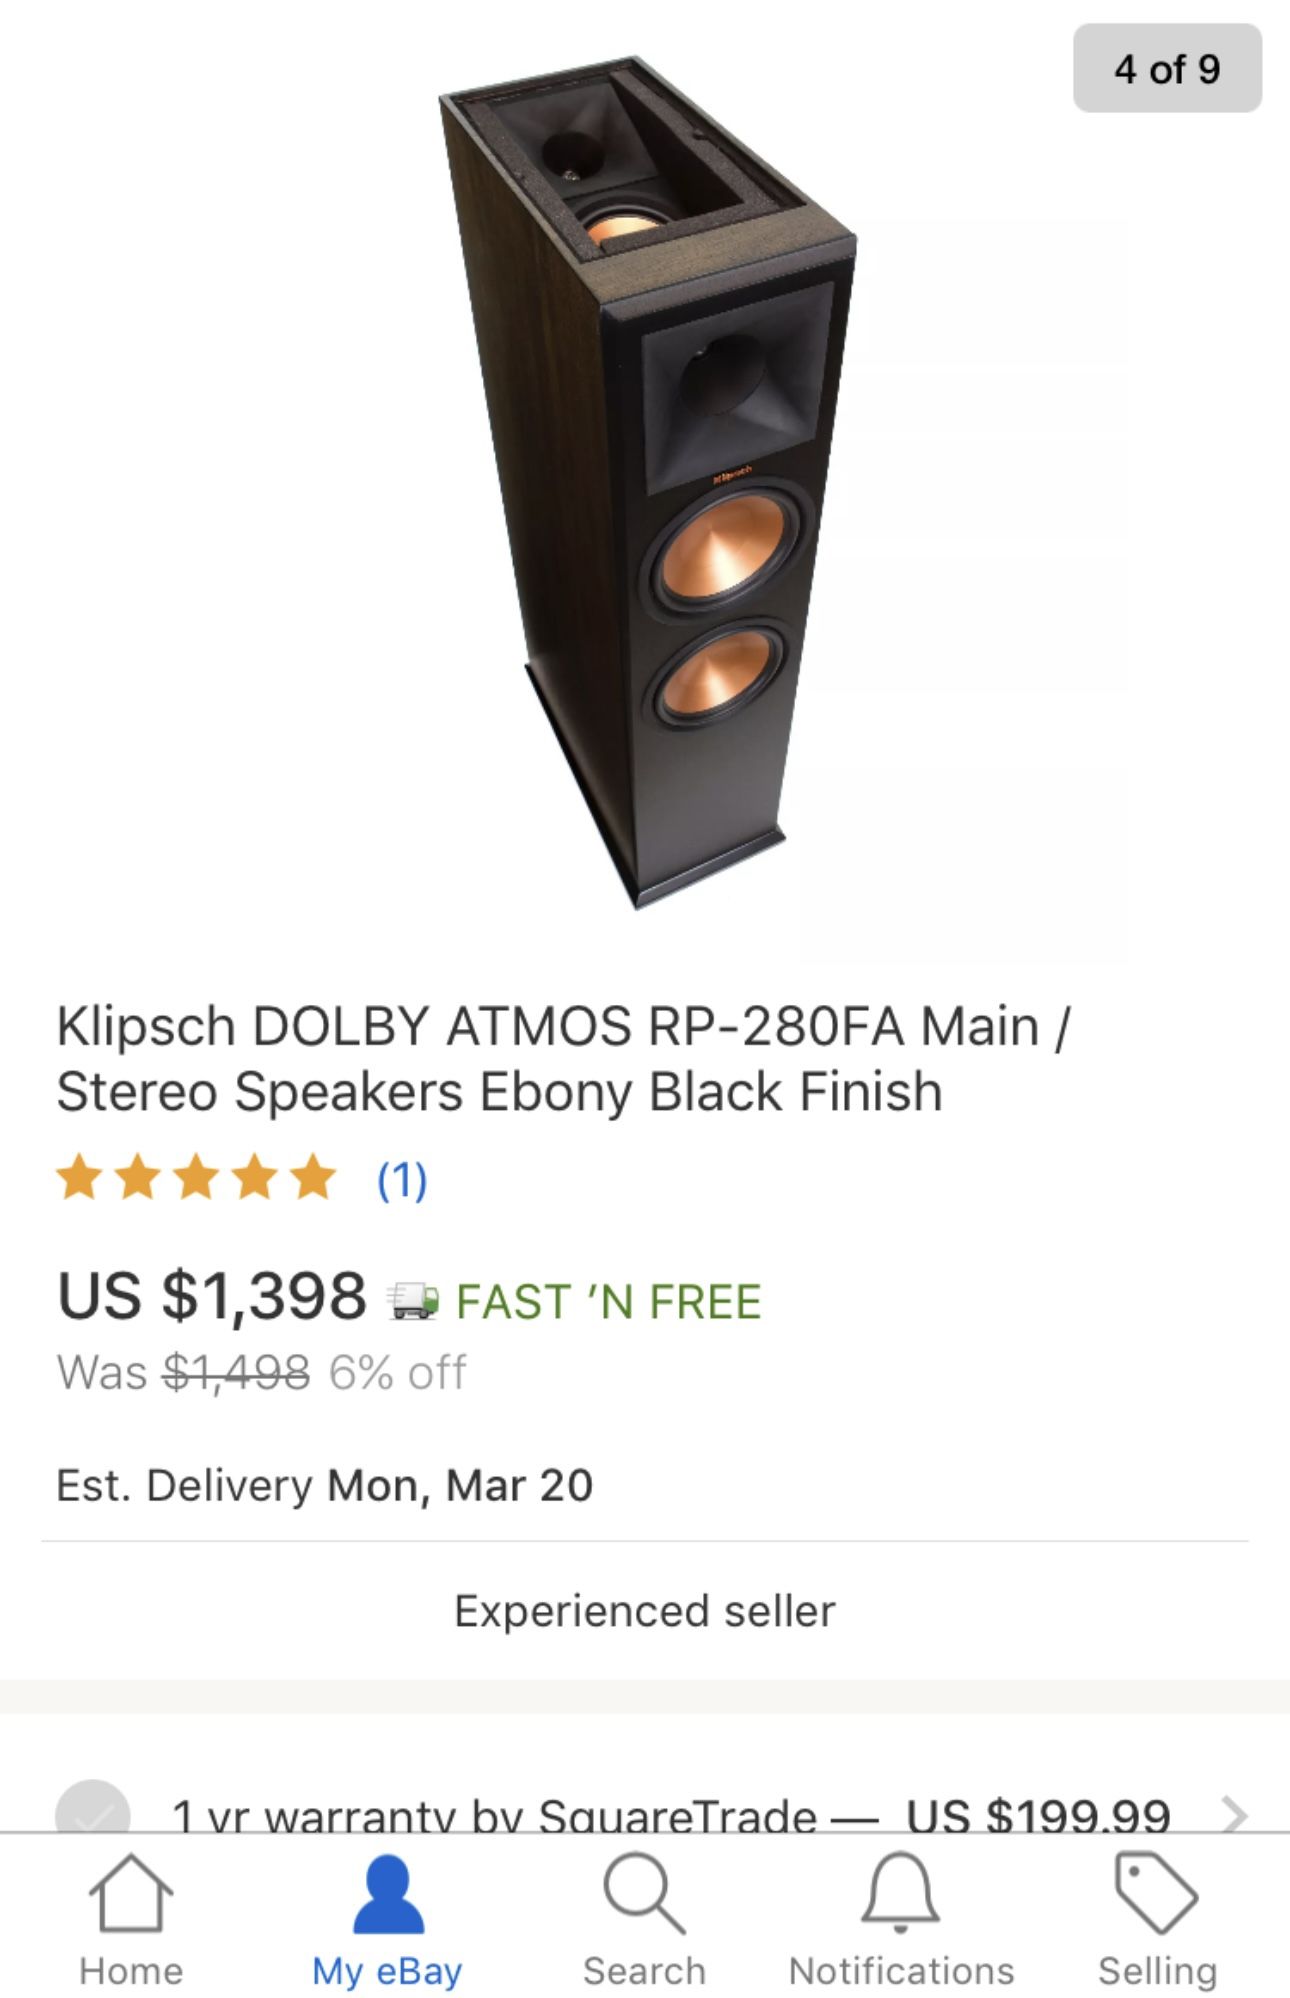 Pair of Klipsch Dolby Atmos RP-280FA Stereo Speakers (Black)